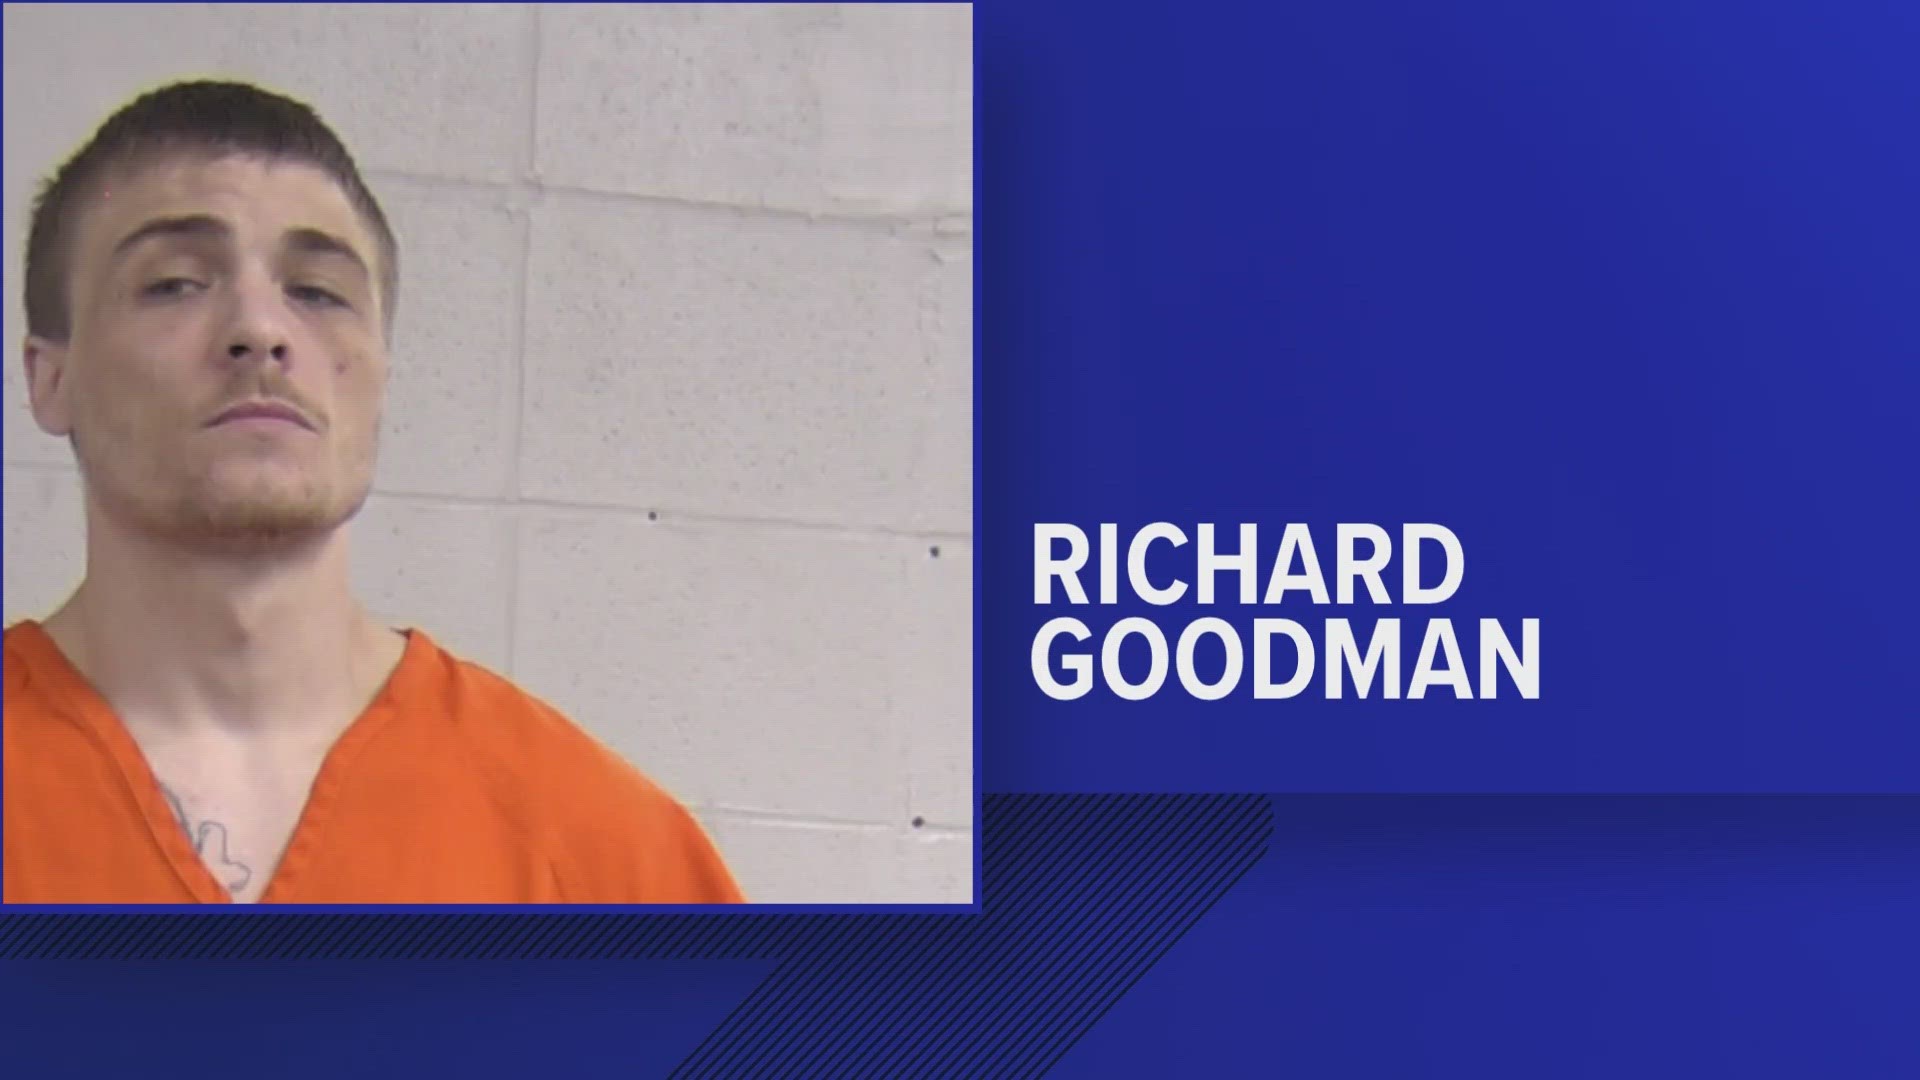 Police arrested Richard Goodman on Wednesday for the fatal shooting of 21-year-old Kylee Miller.